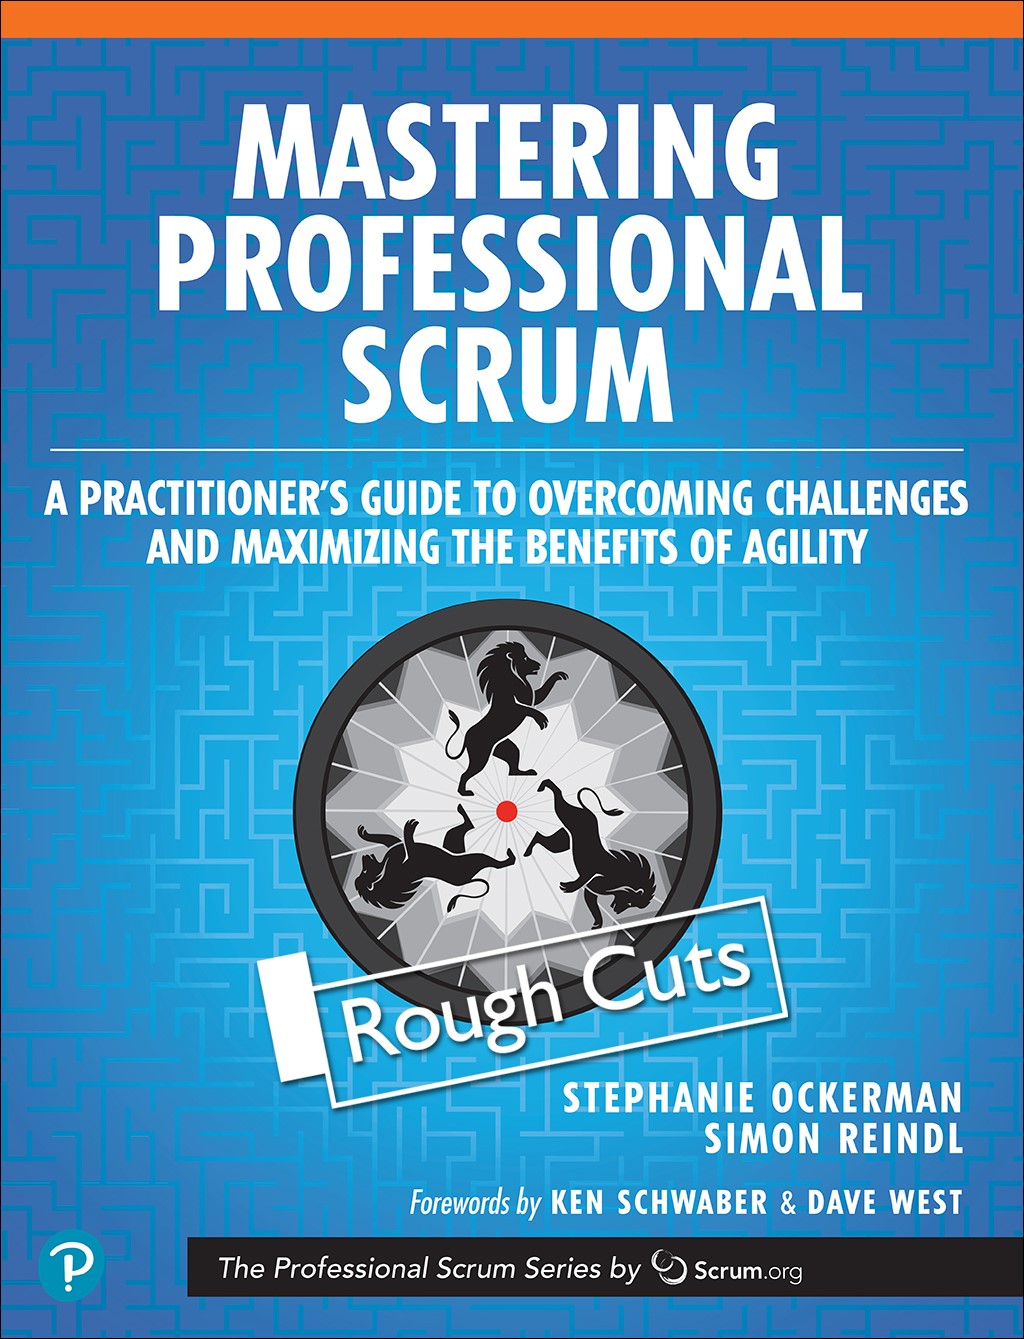 Mastering Professional Scrum: A Practitioners Guide to Overcoming Challenges and Maximizing the Benefits of Agility, Rough Cuts